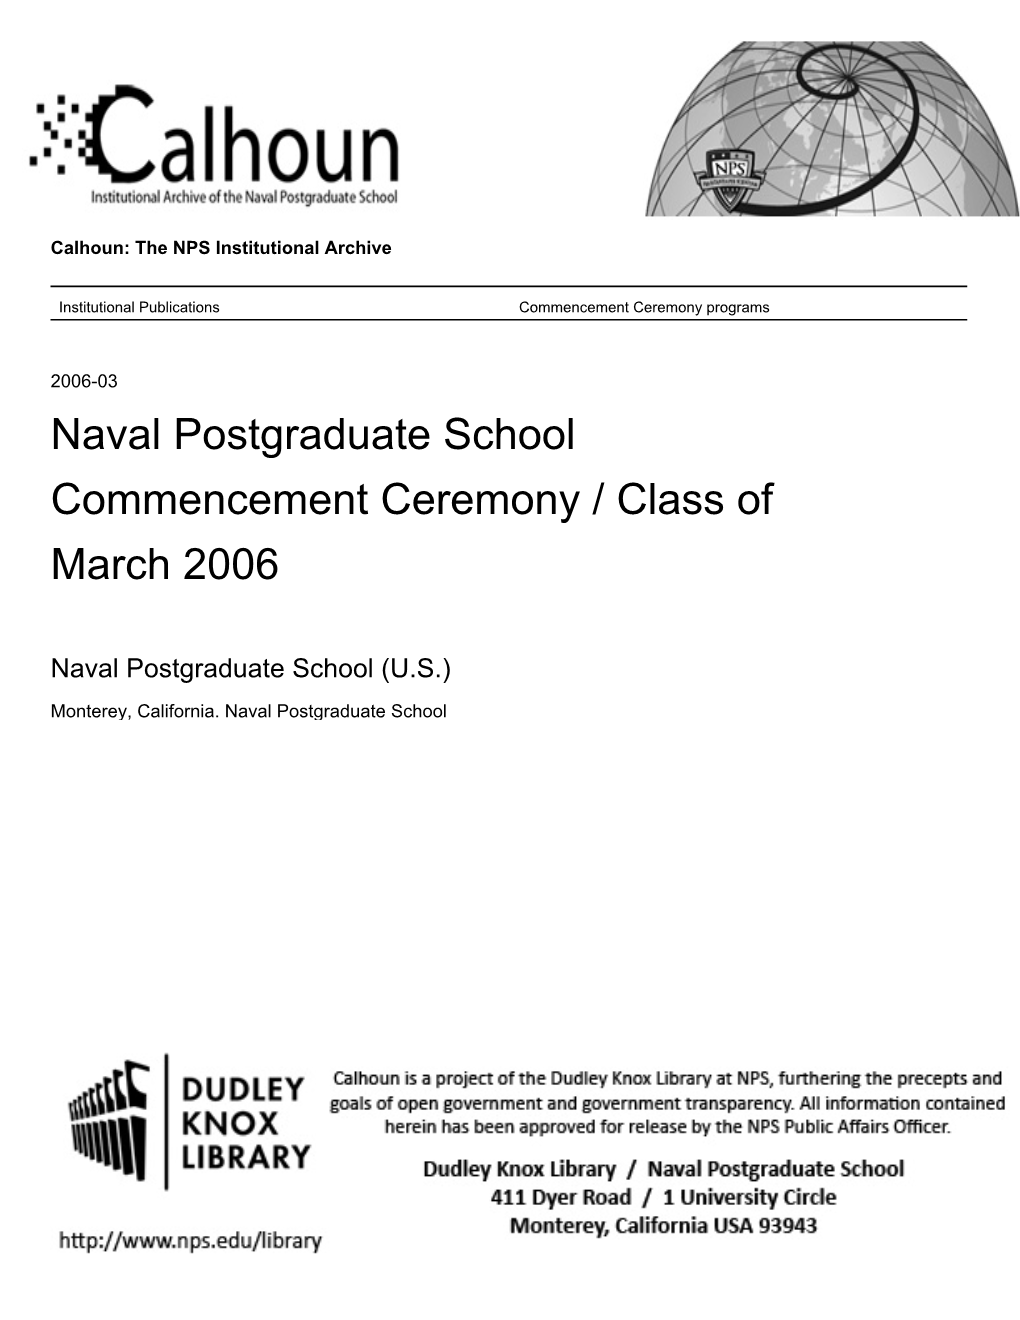 Naval Postgraduate School Commencement Ceremony / Class of March 2006